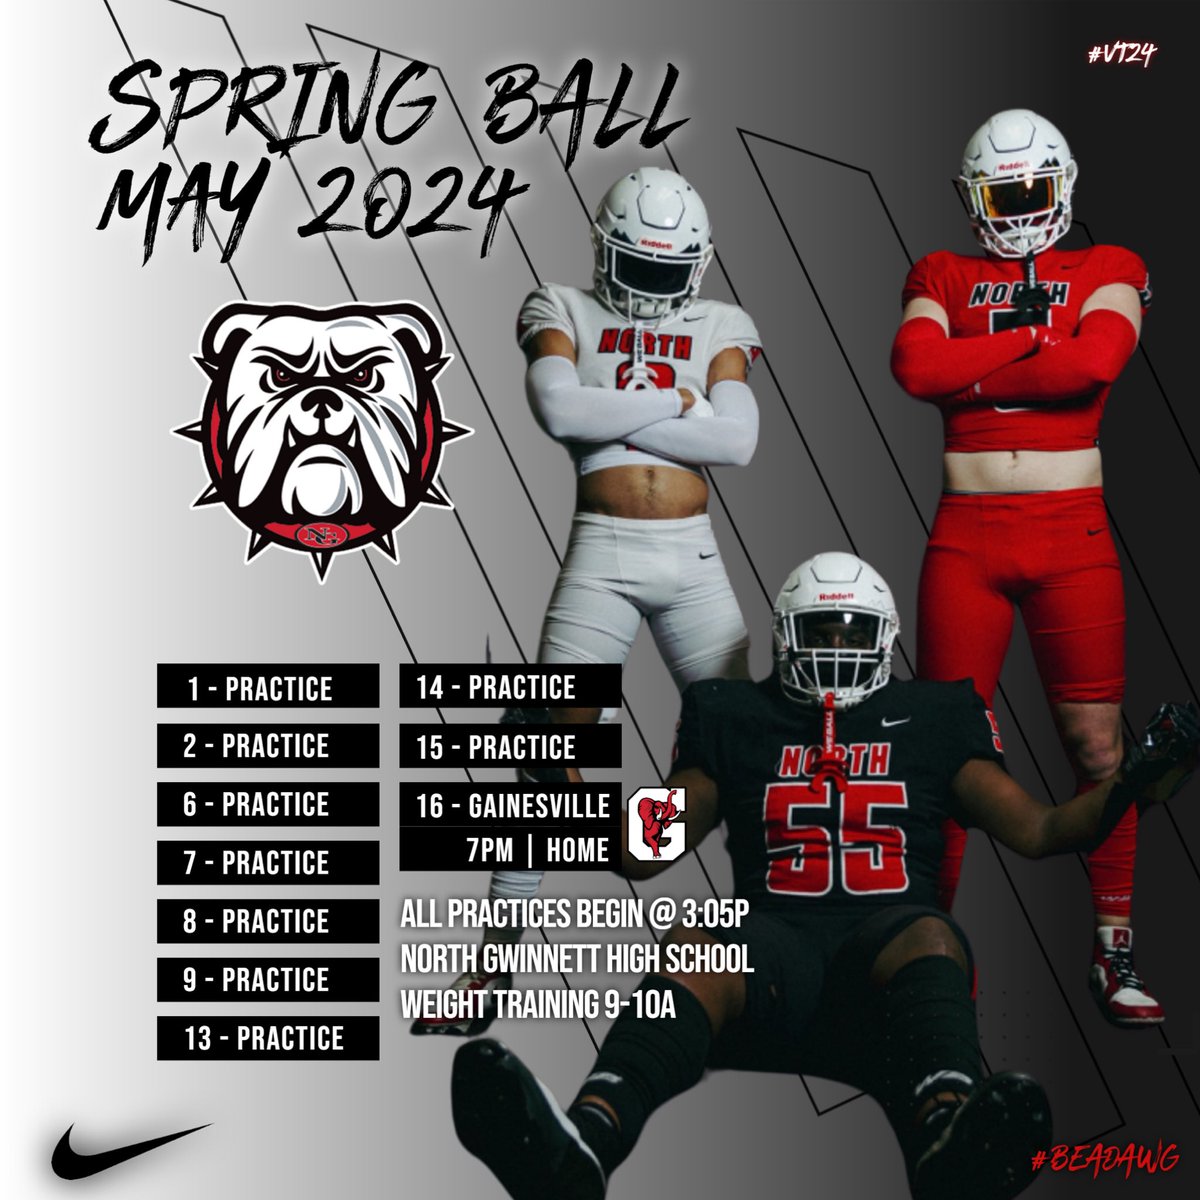 🚨2024 NORTH GWINNETT SPRING BALL PRACTICE DATES - MAY🚨

#NORTH #FAMILY #BeADawg #VT24